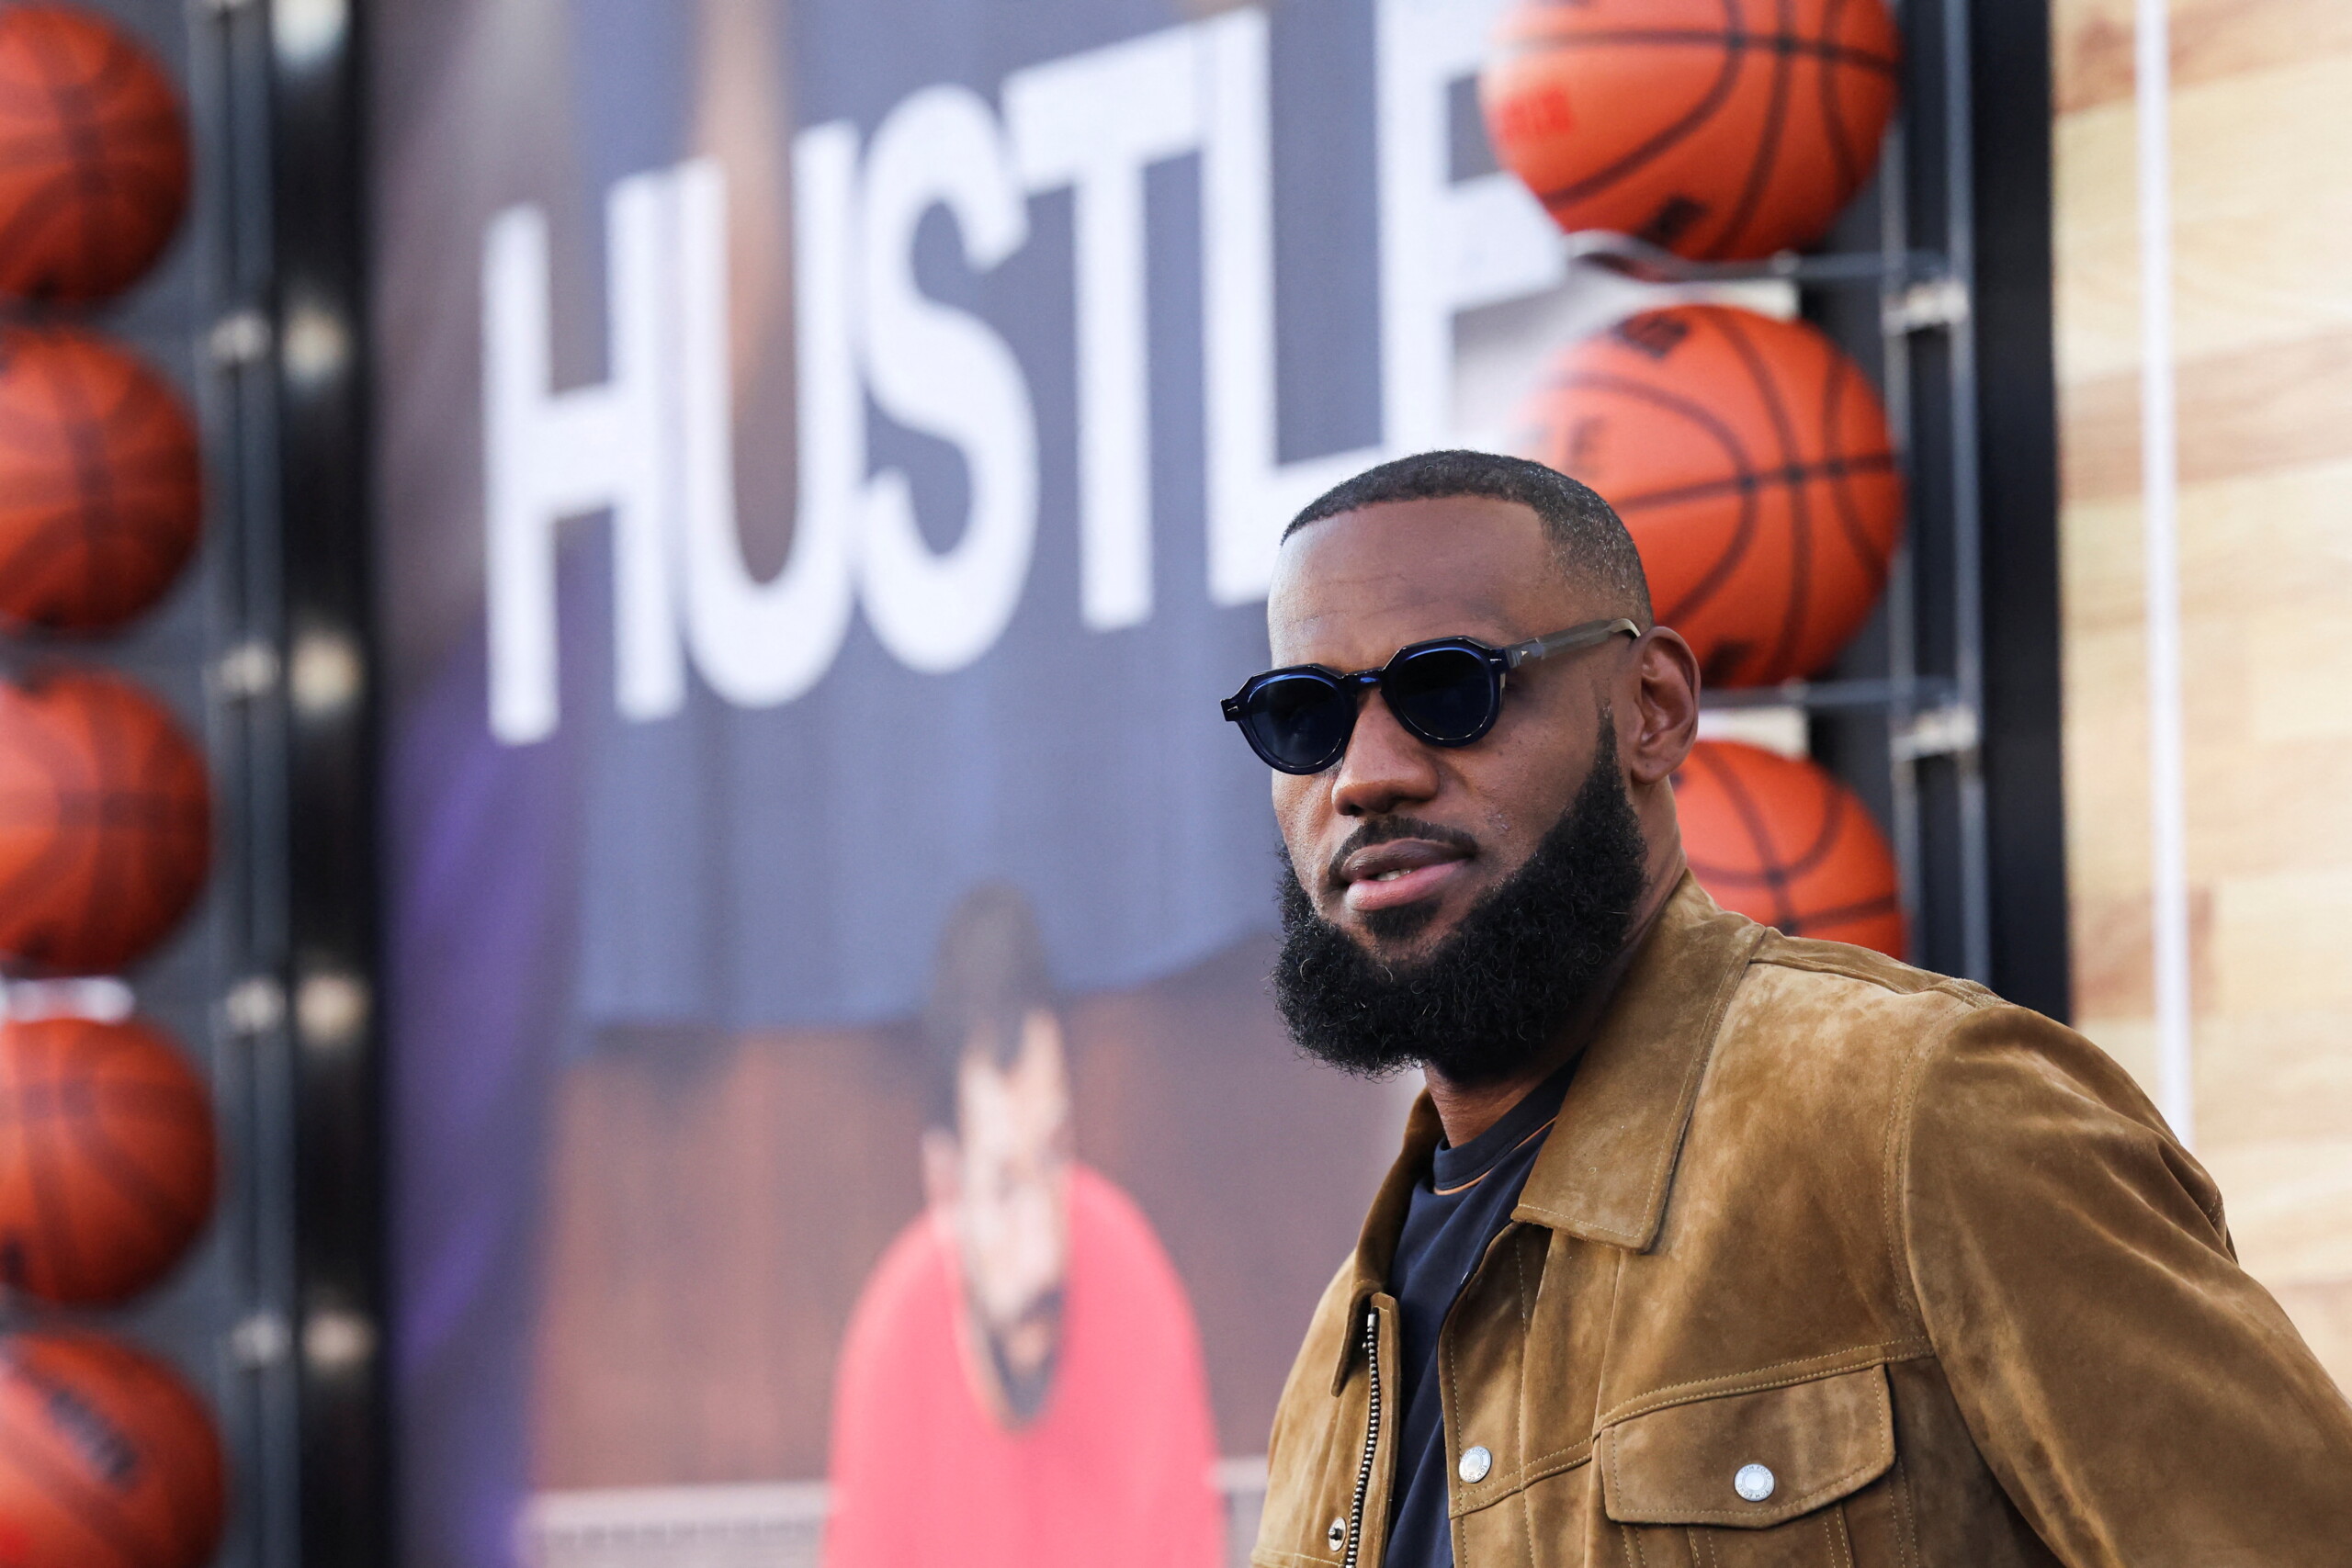 LeBron James became a billionaire and marked a historic milestone scaled